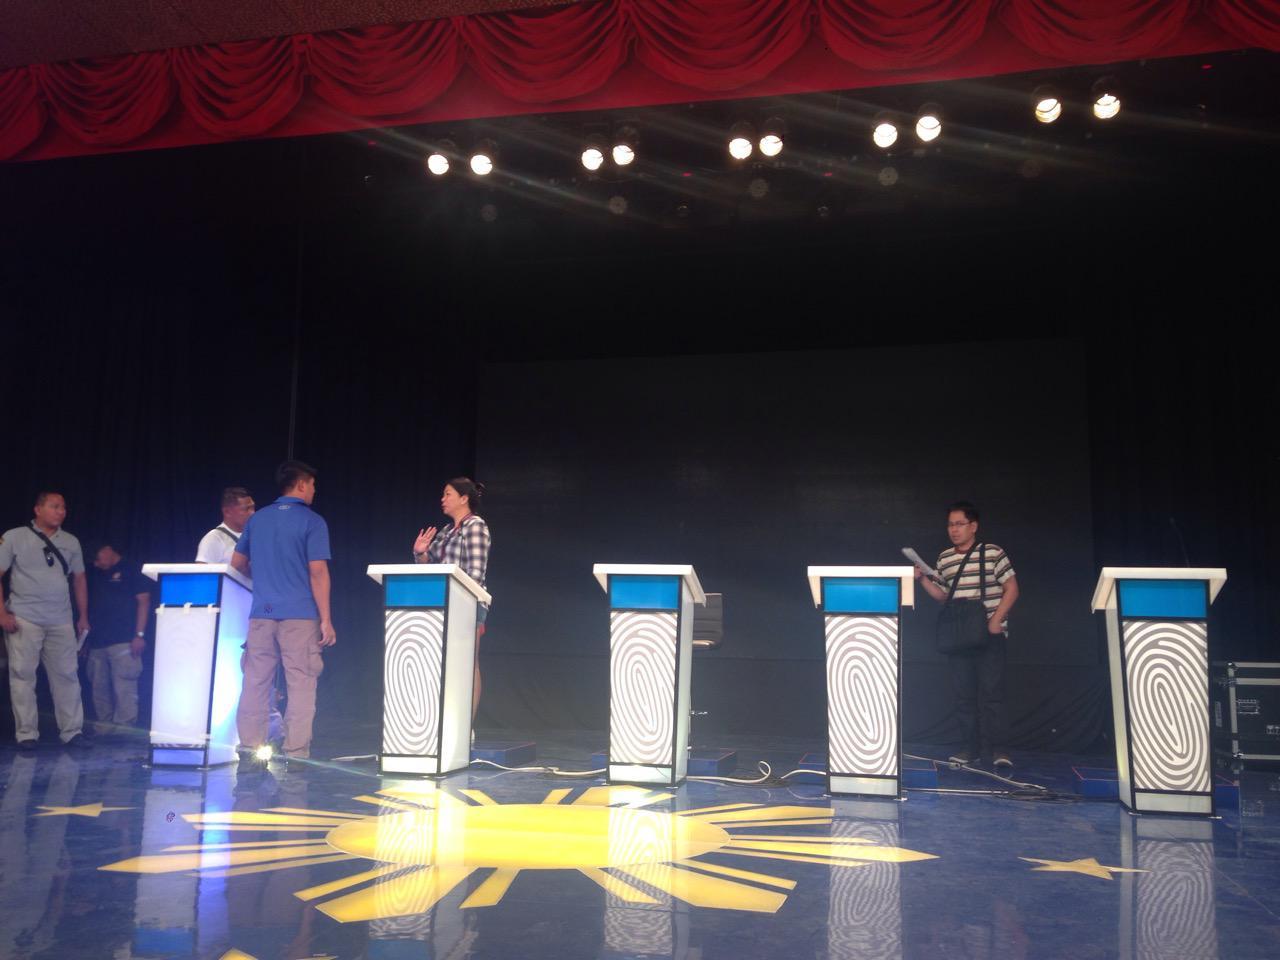 Technical staff check on the stage where Sunday's debate will be held. Photo by JESSICA BARTOLOME, GMA News